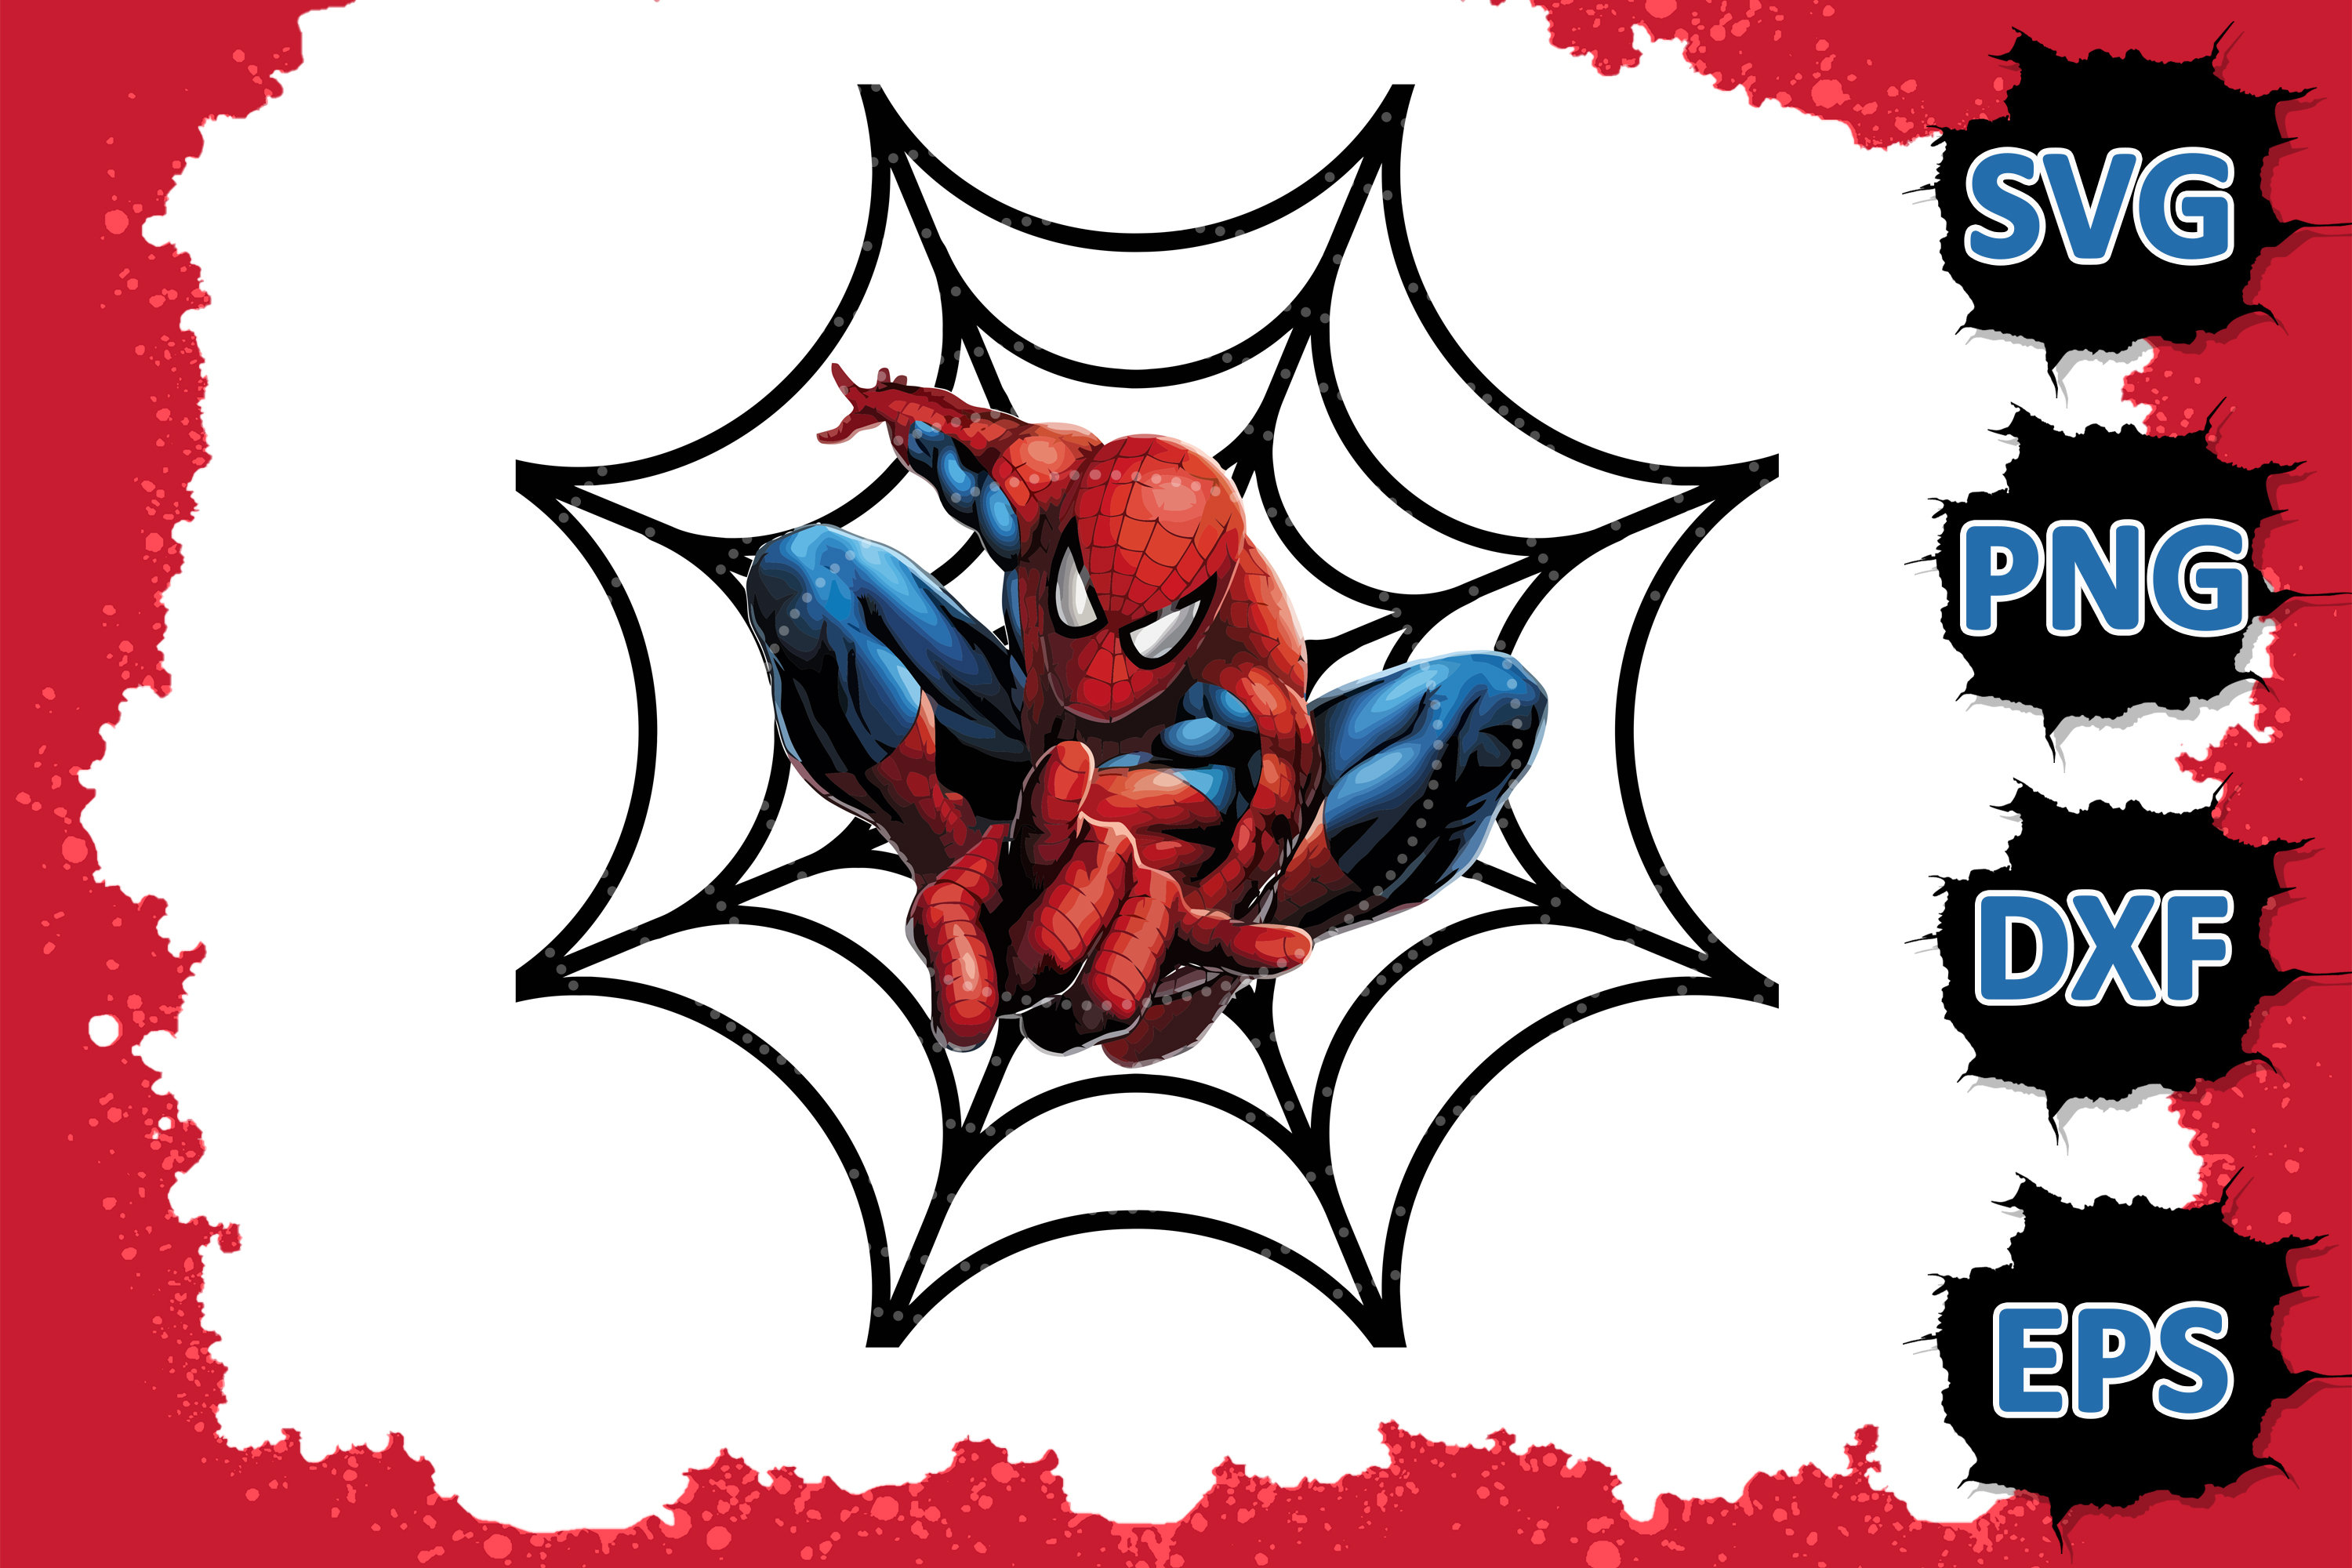 Buy Spiderman Png File Online In India - Etsy India